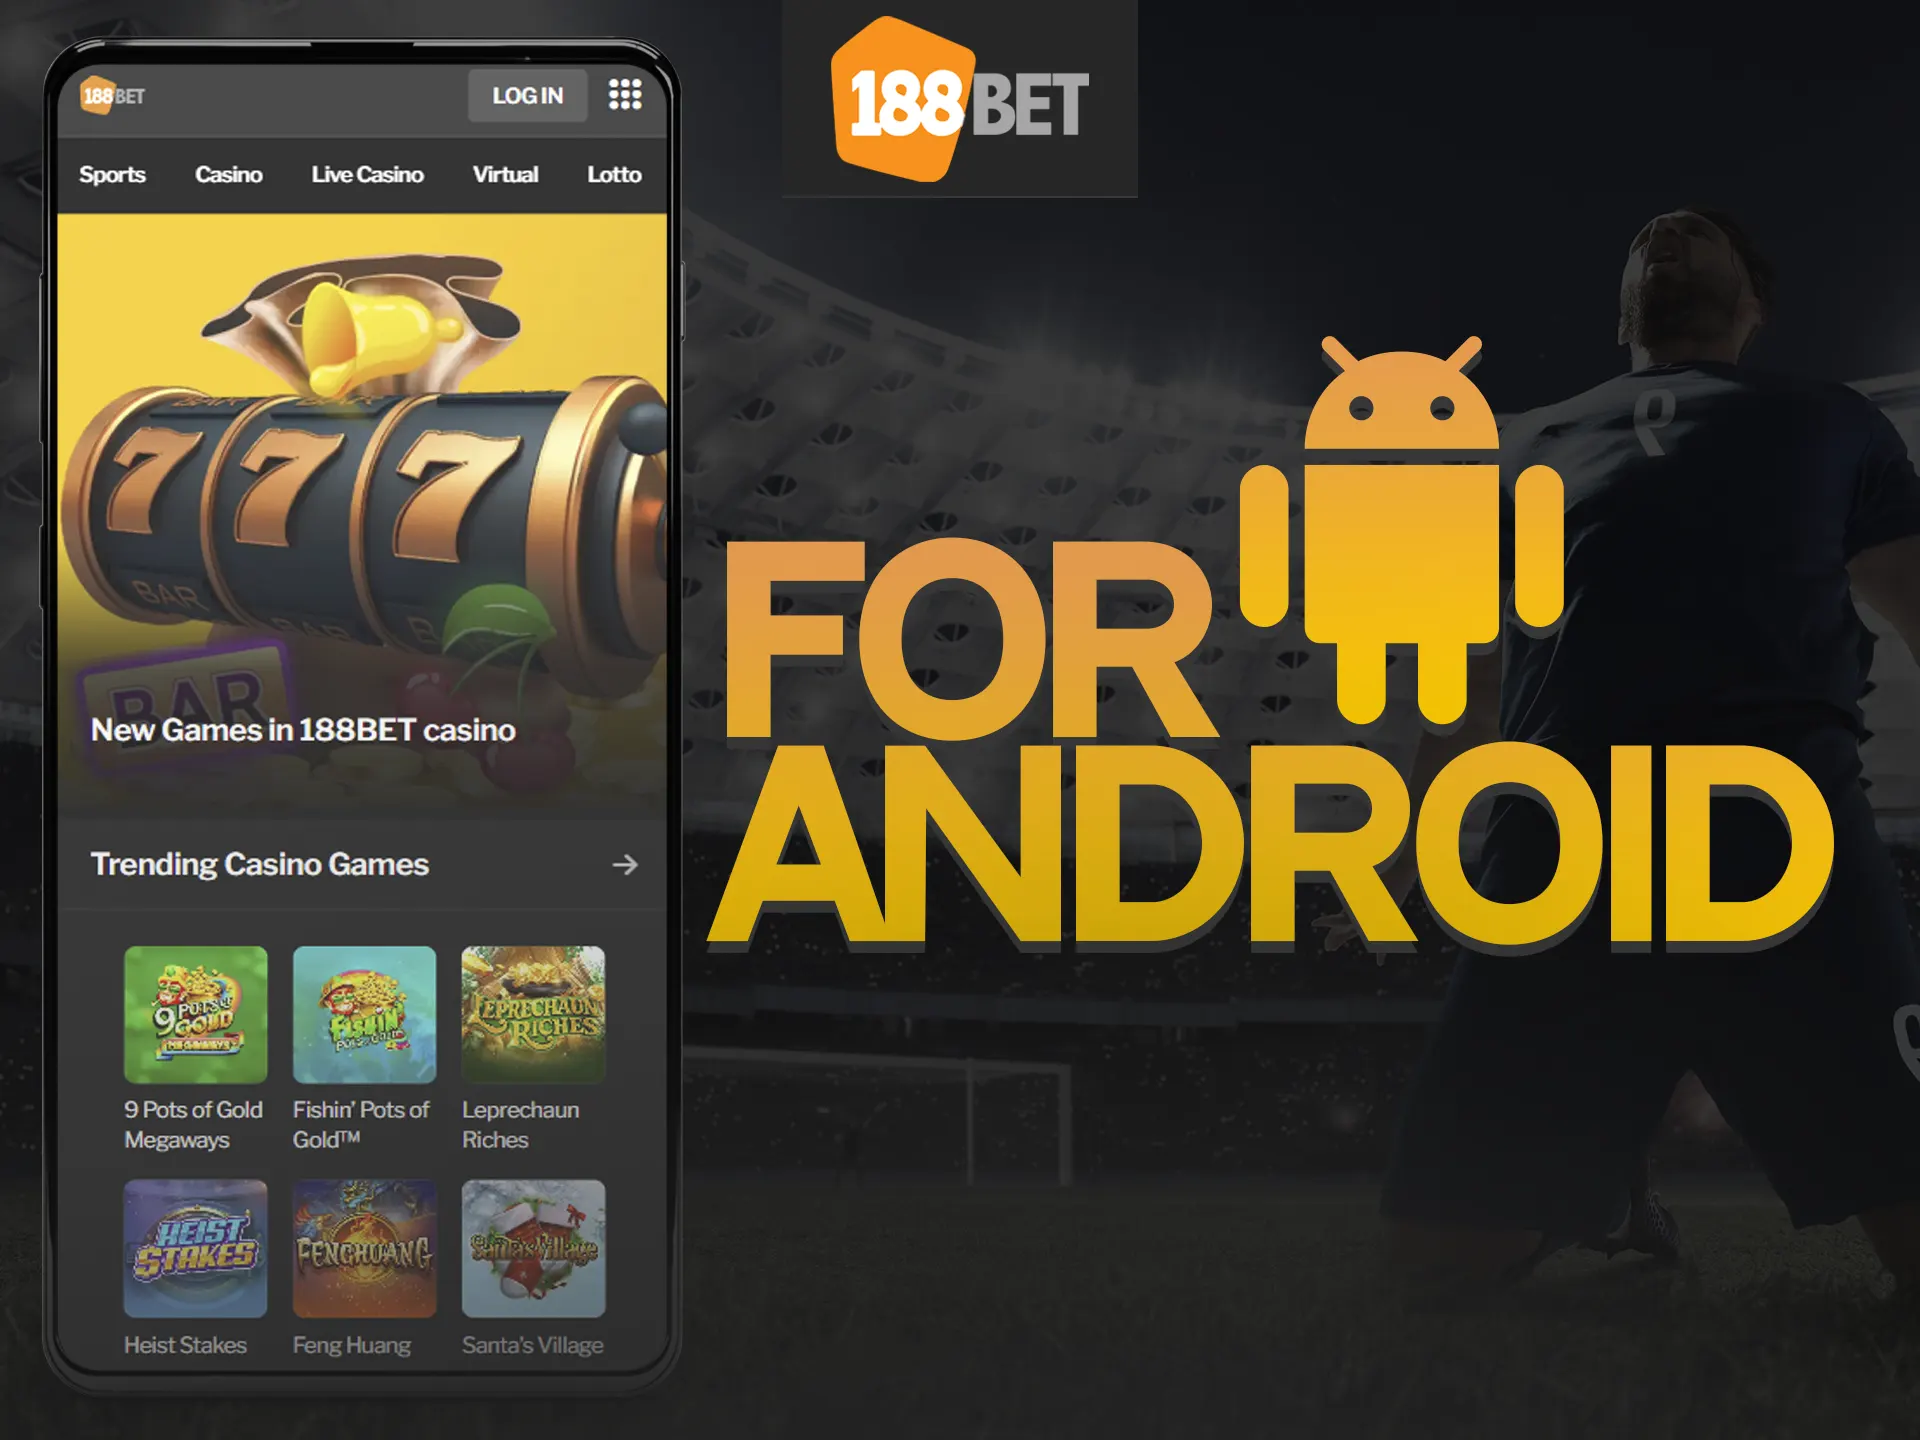 Start the process of installing the 188bet app on your Android device.